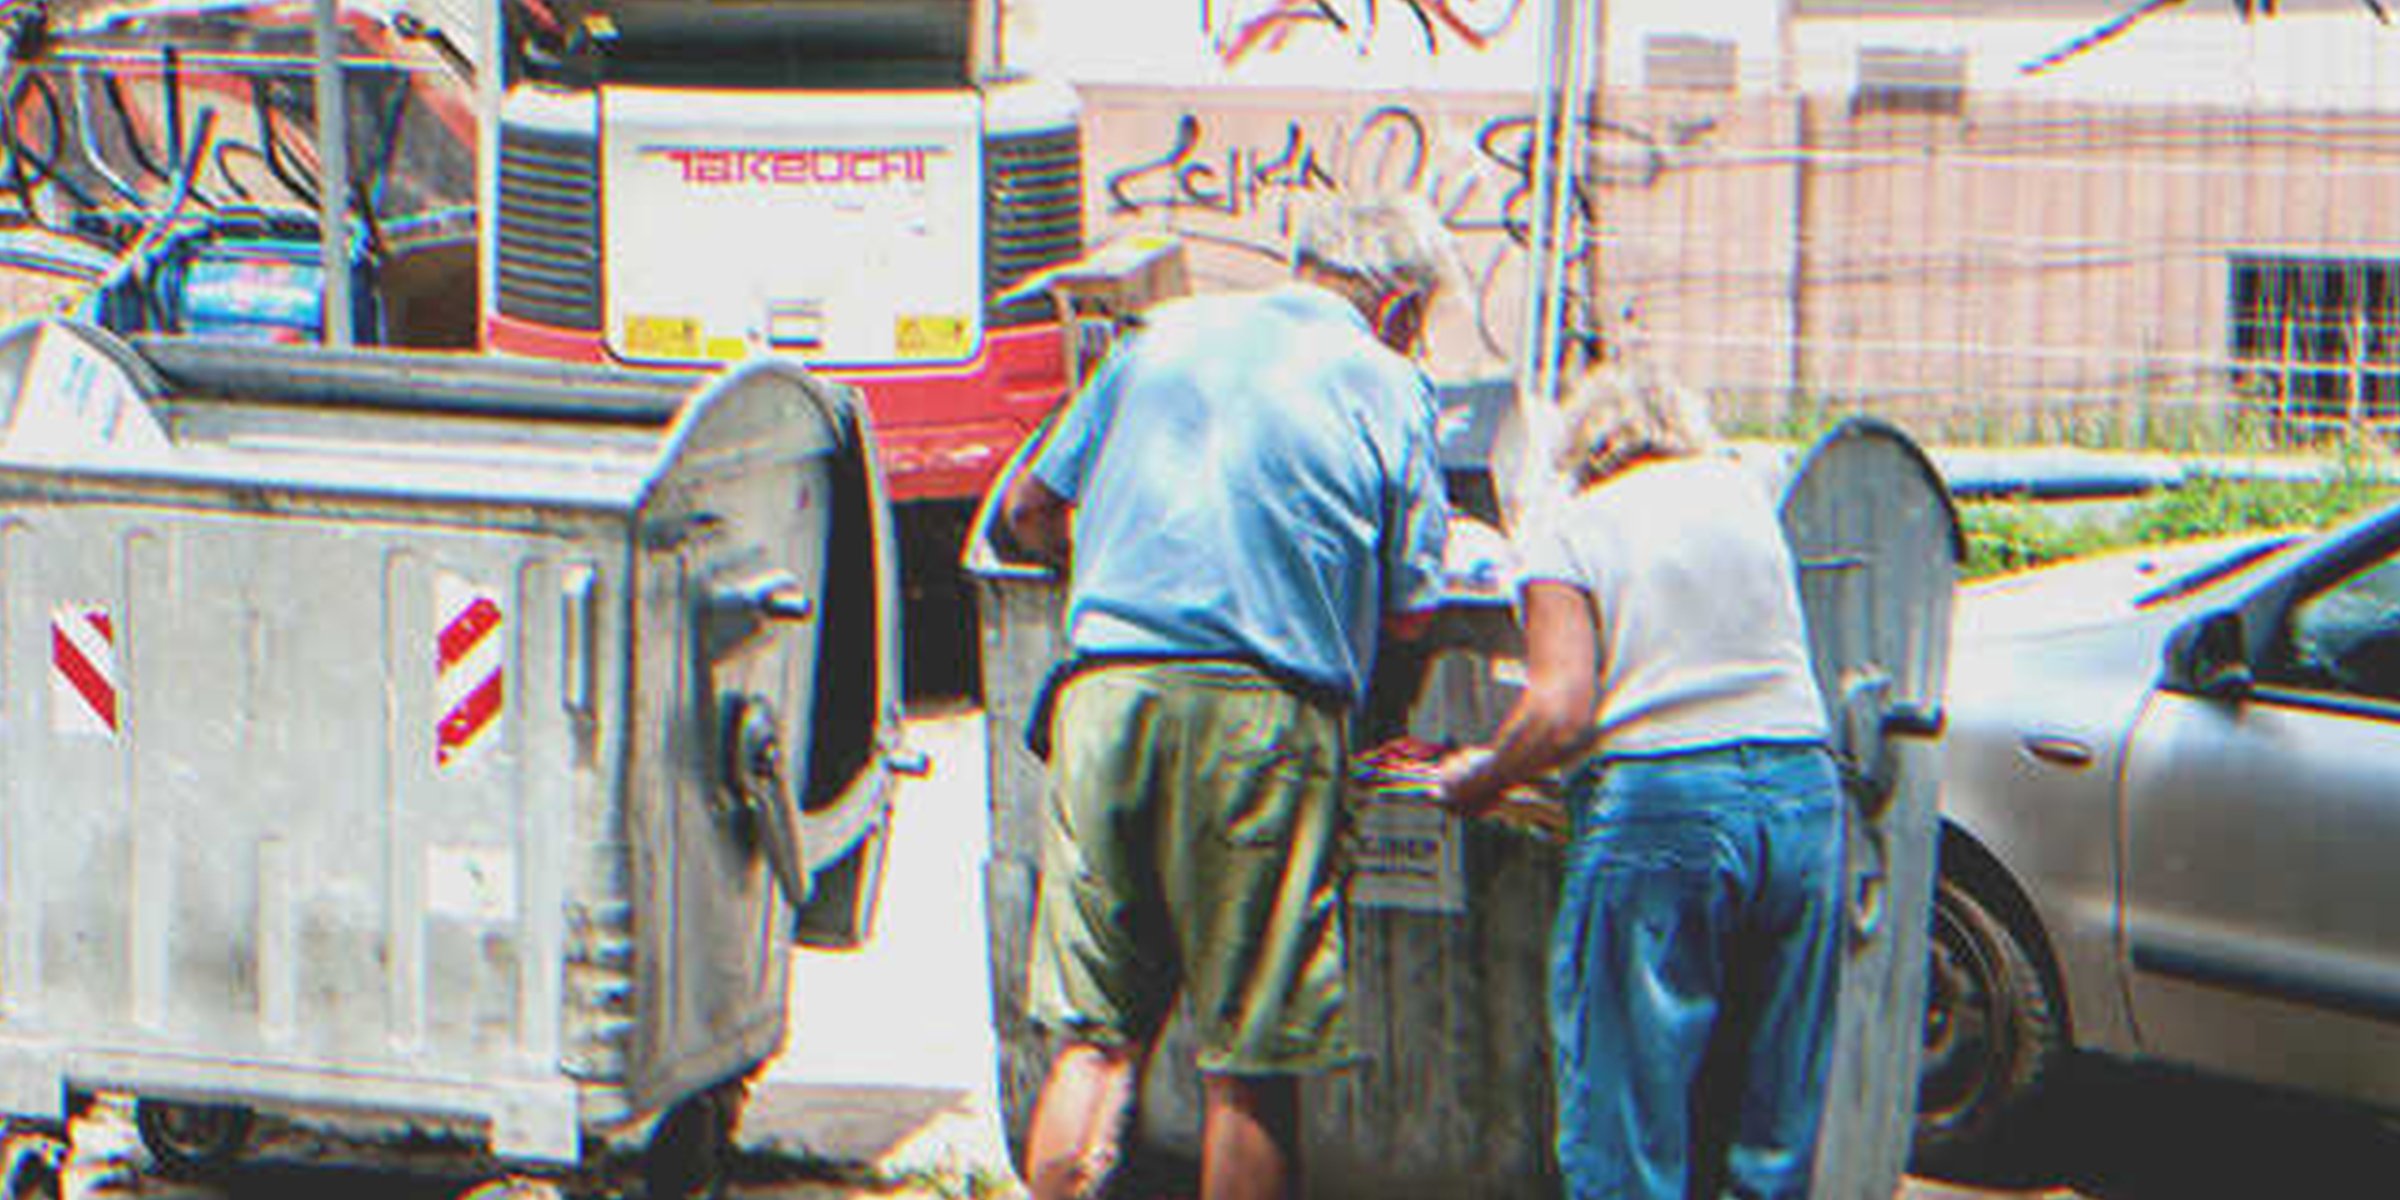 Two persons digging through a dumpster | Source: Shutterstock